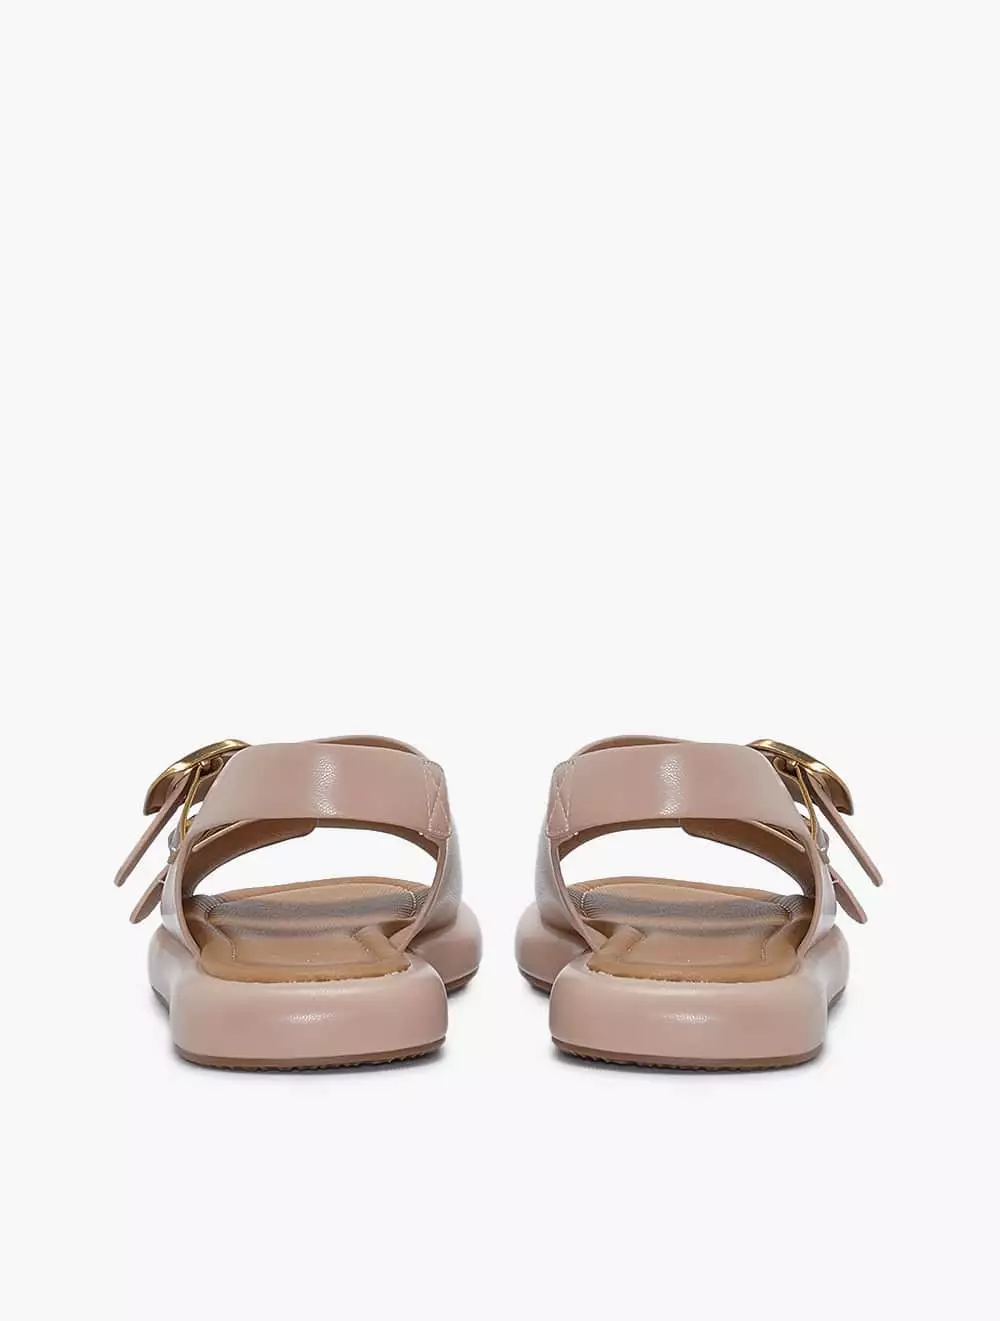 Jual PAYLESS Payless Chrissie Womens Maida Sandals - Nude_05 - Nude ...